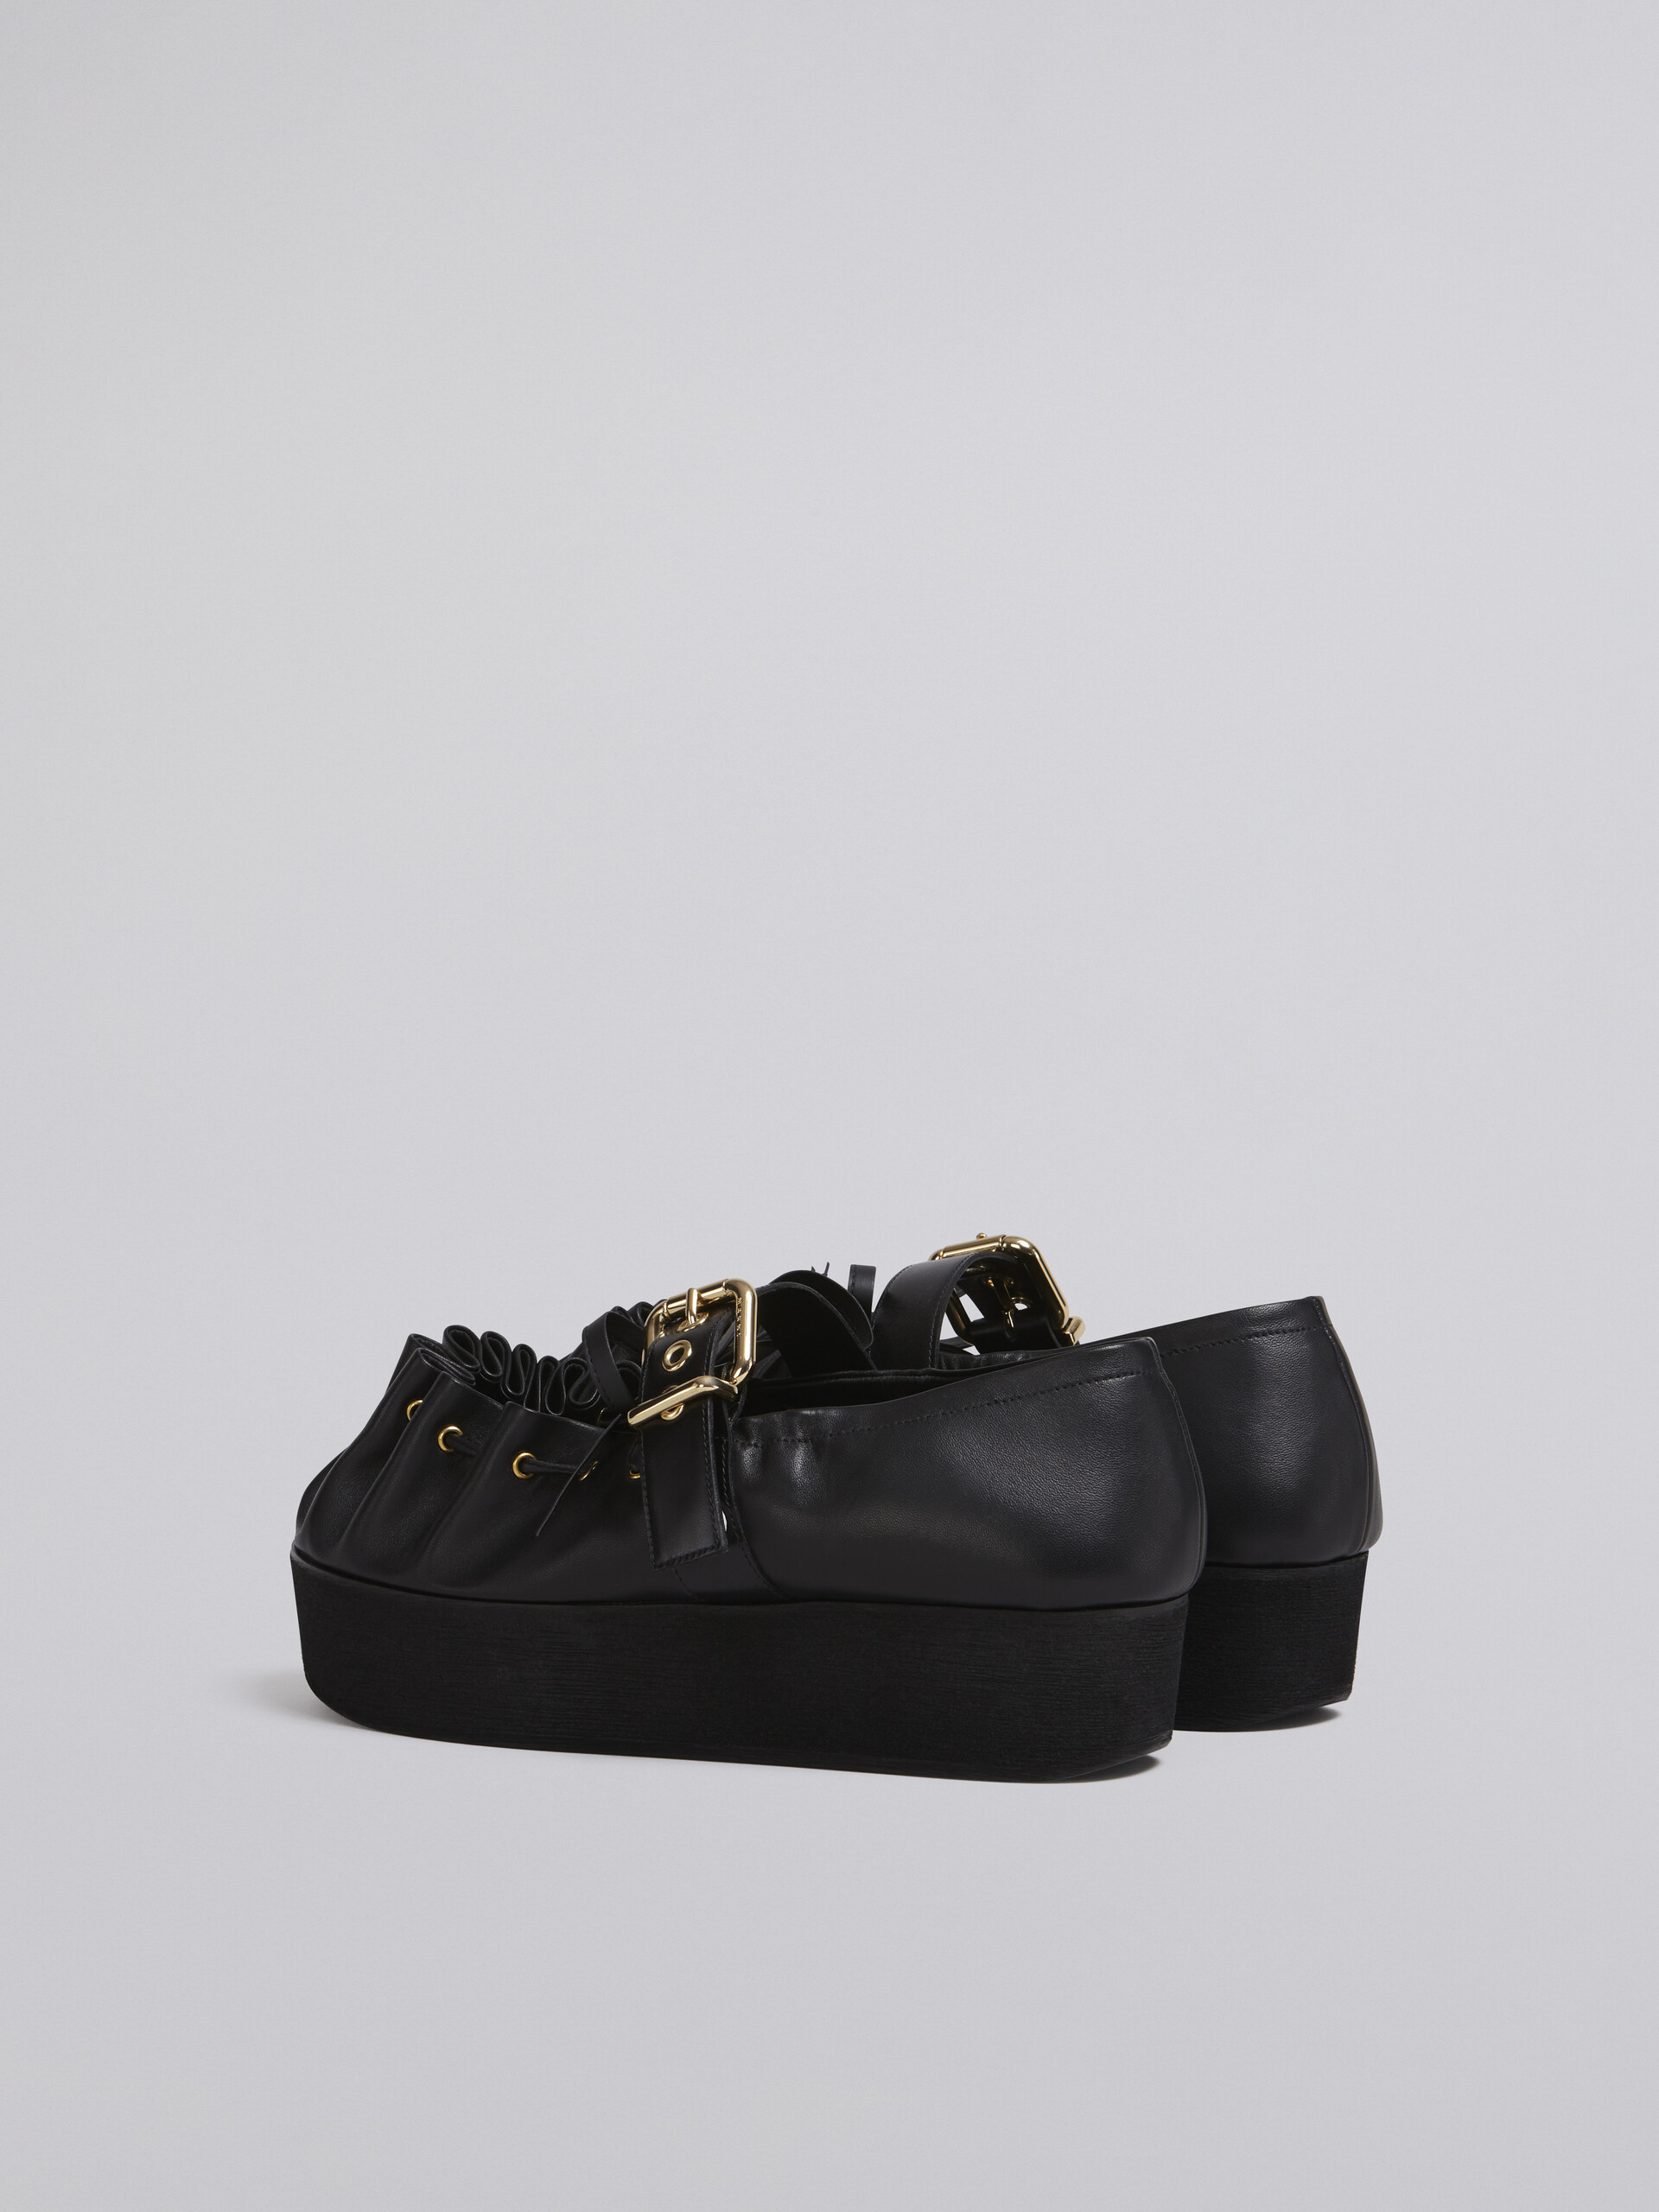 Nappa leather ballerina with rouched rounded captoe - Sandals - Image 3